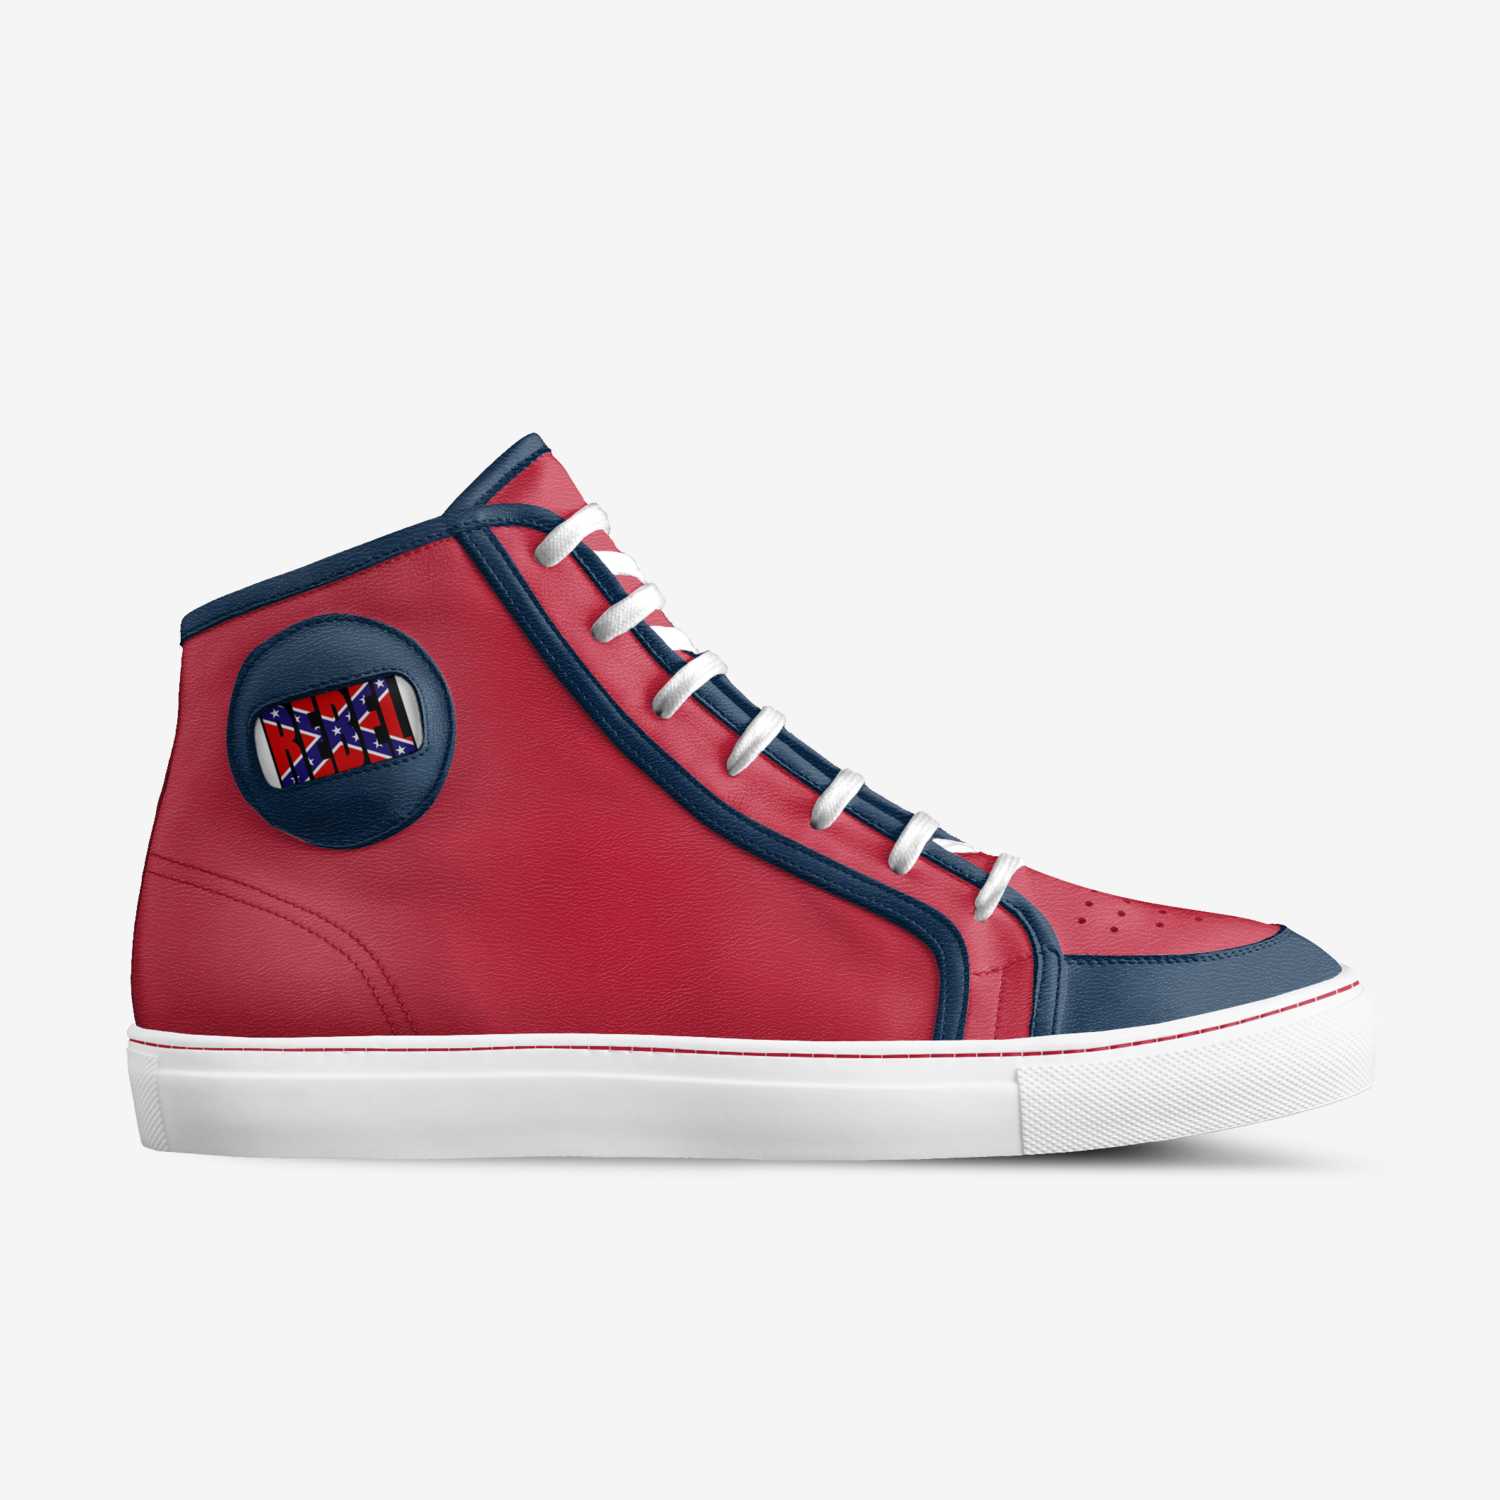 confederate | A Custom Shoe concept by Dylan Mr